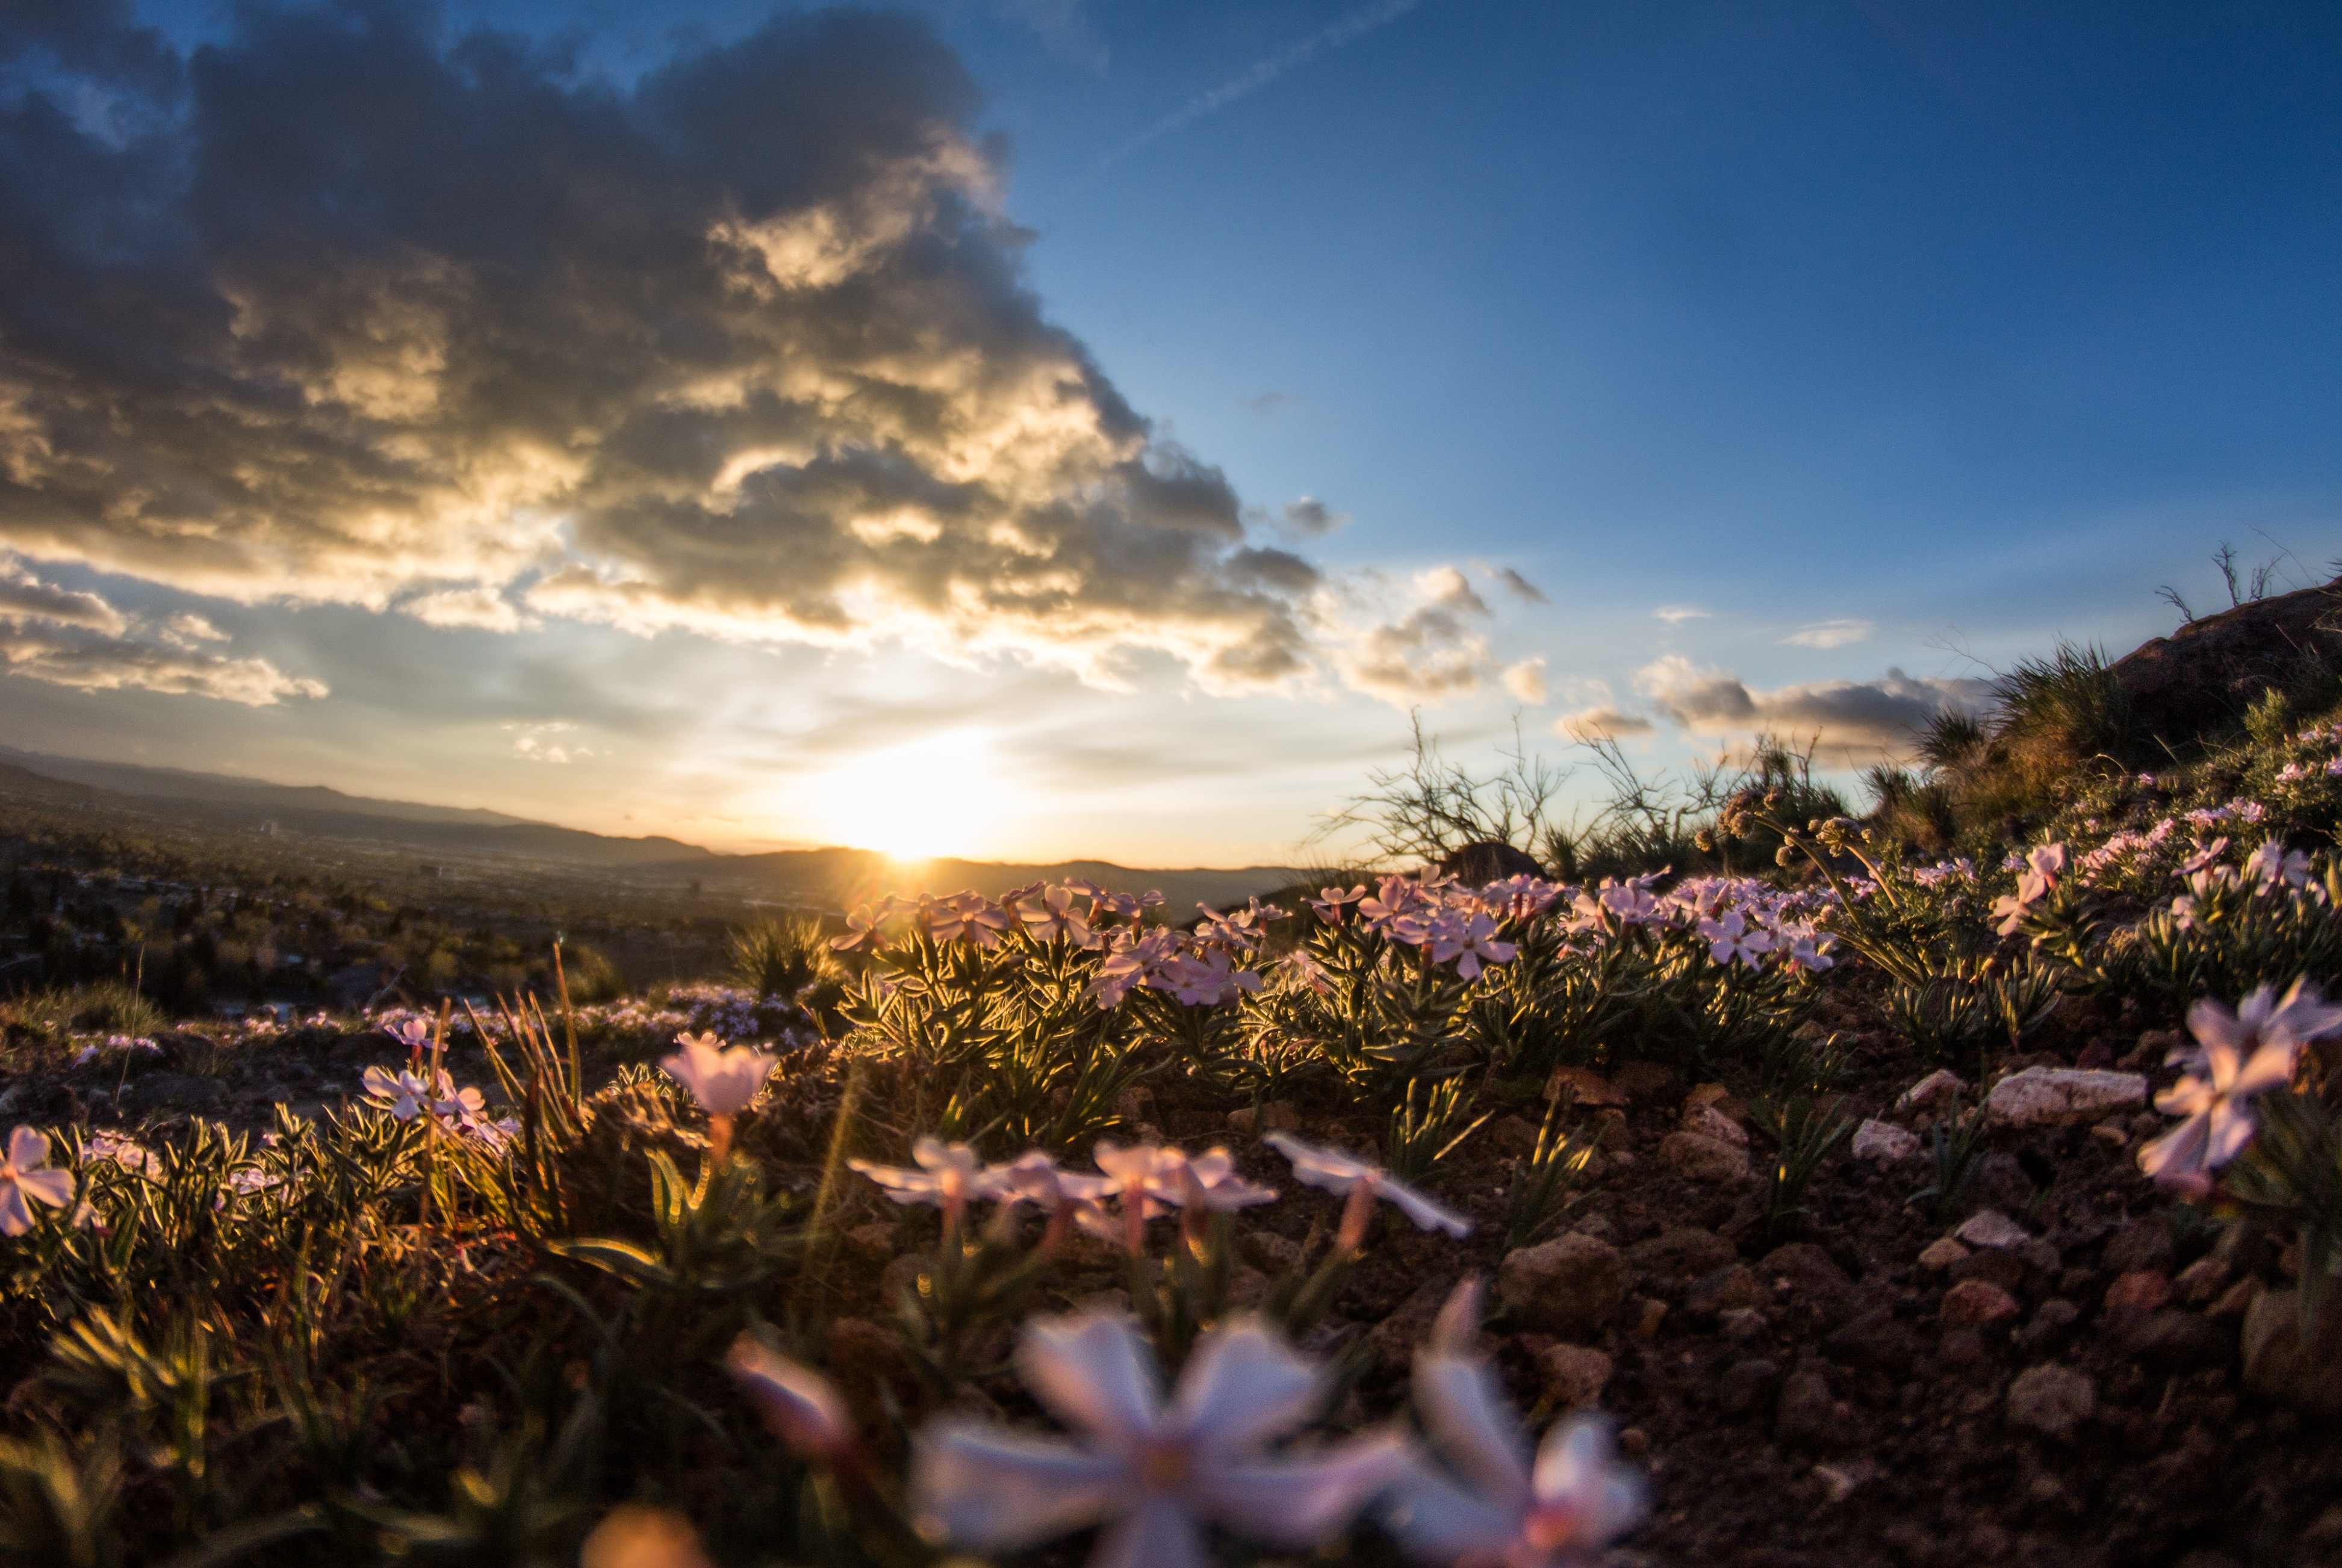 A field of flowers at sunset